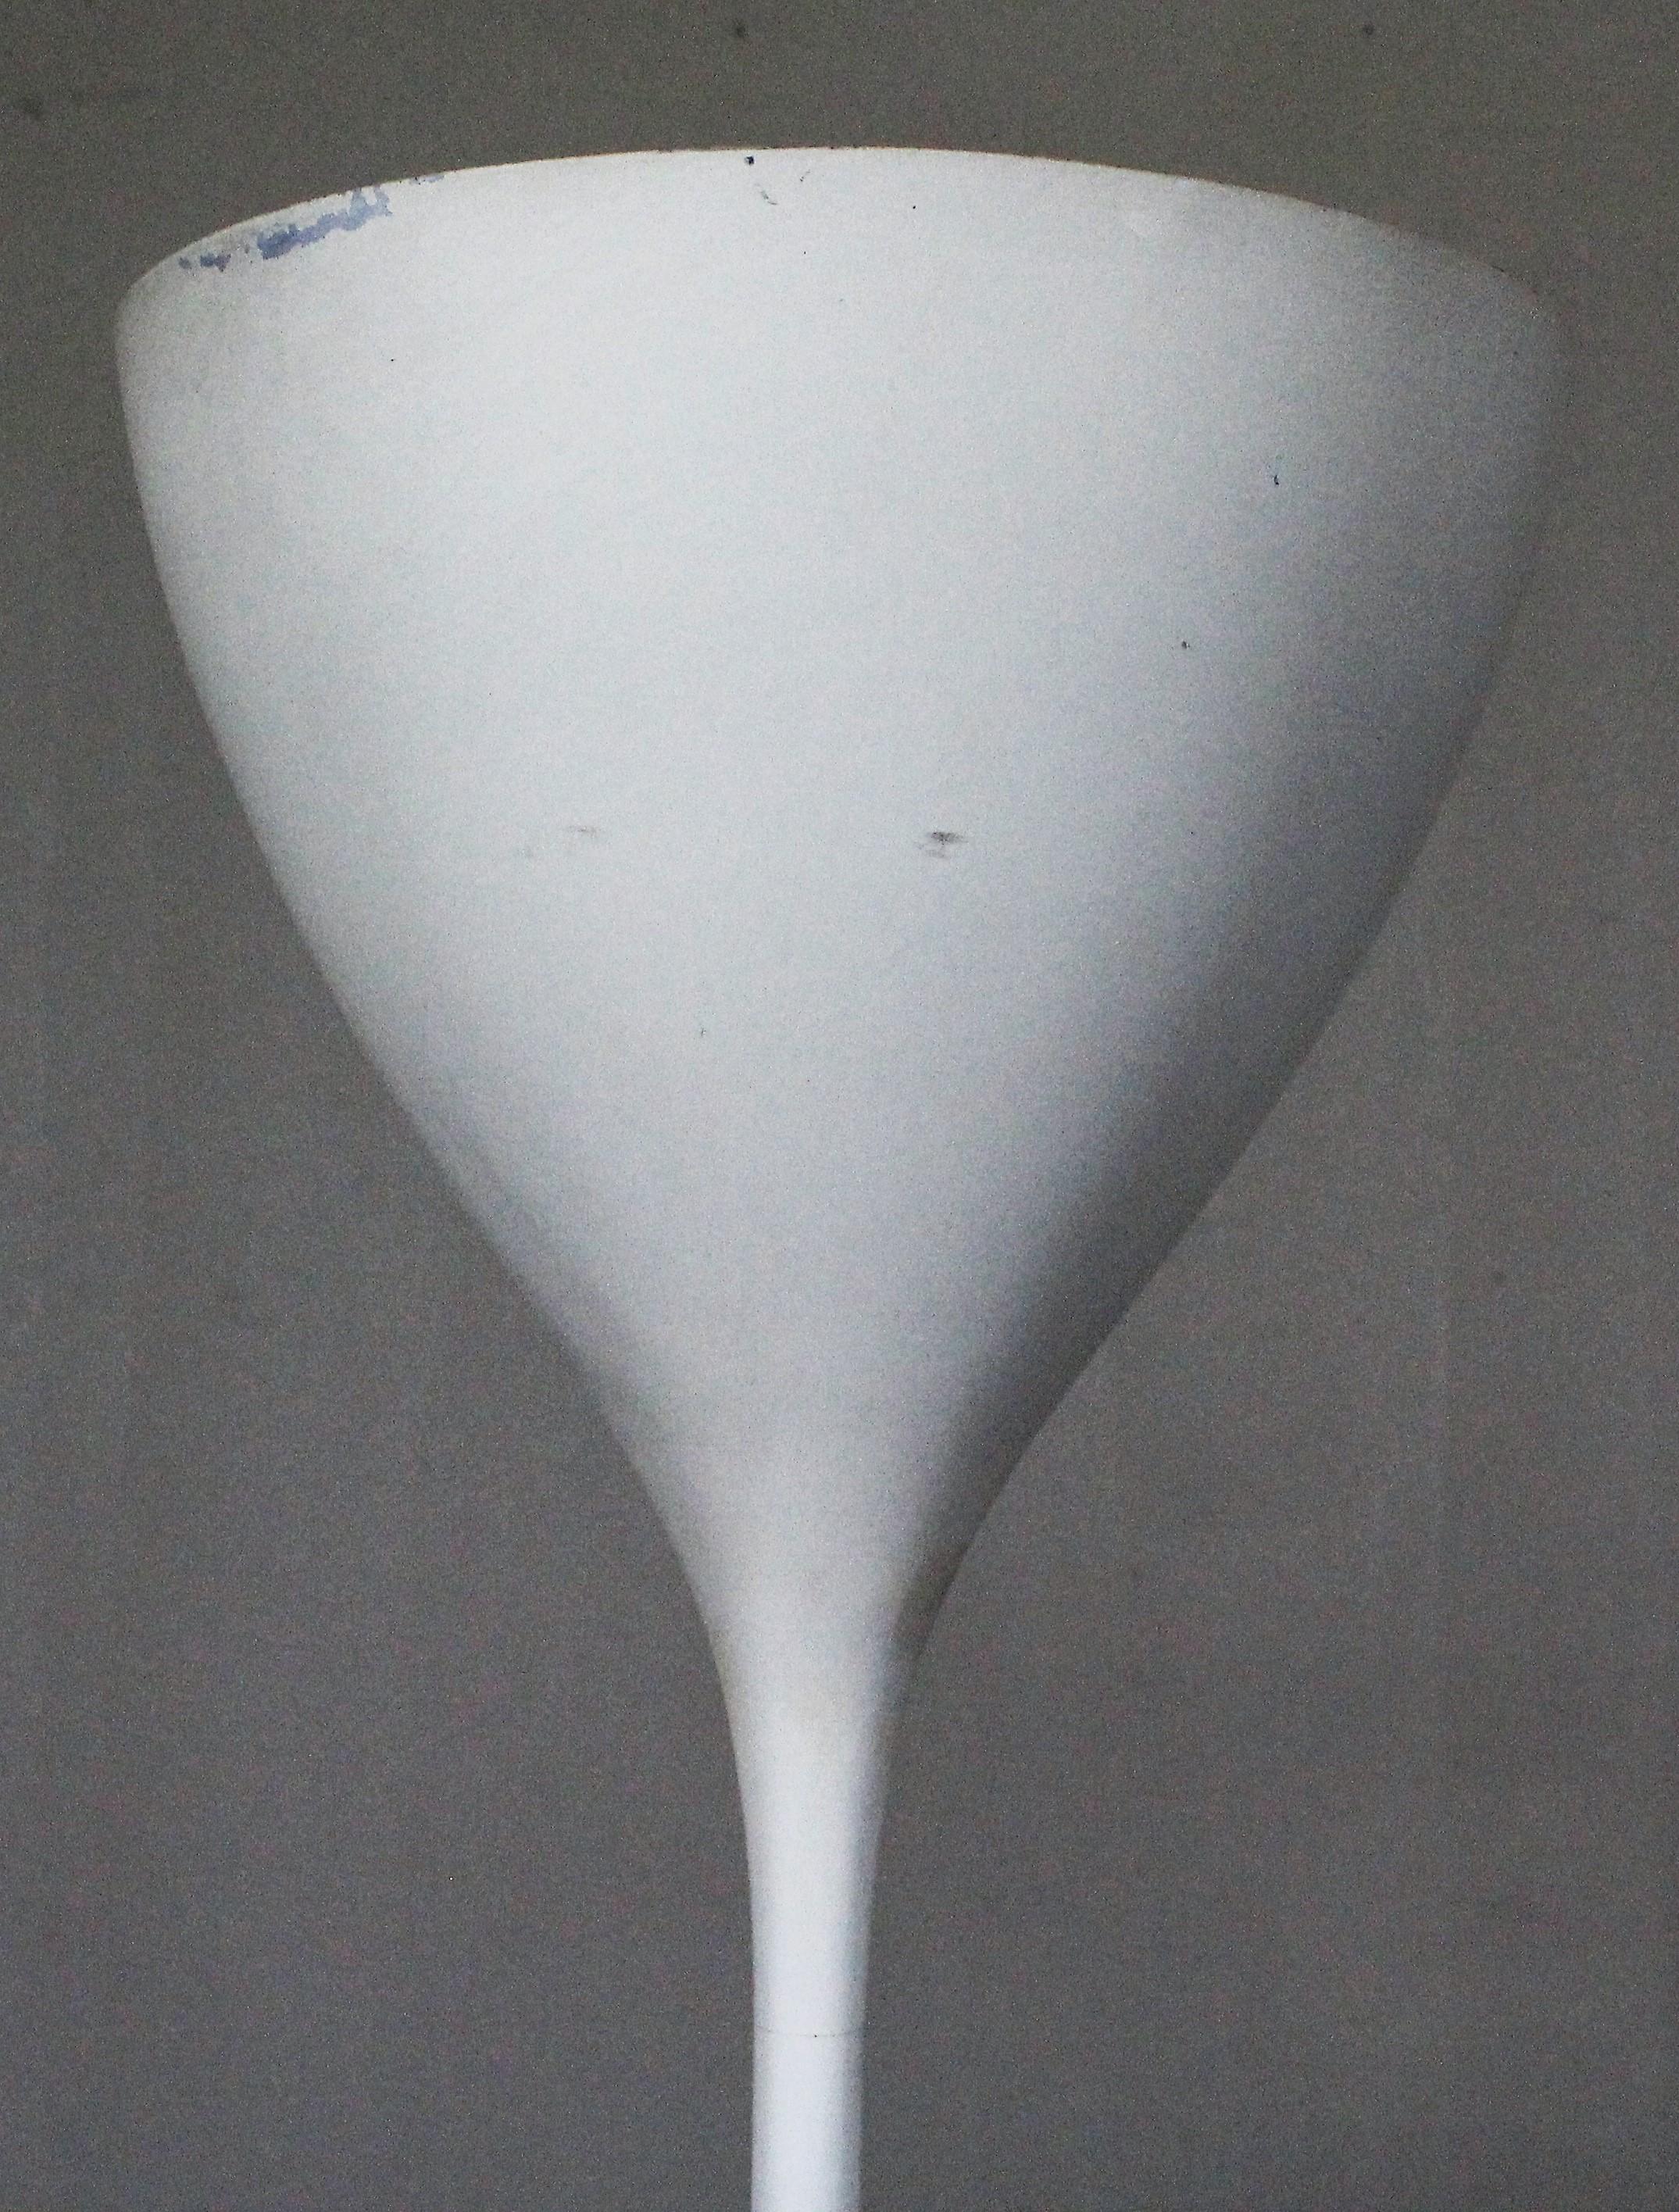 Offered is an mid-century modern torchiere lamp designed by Max Bill for B.A.G. Turgi. Features a thin stem and tulip-shaped shade covered in white enamel with a cord floor switch. It has been tested, is in good condition, showing some cosmetic wear